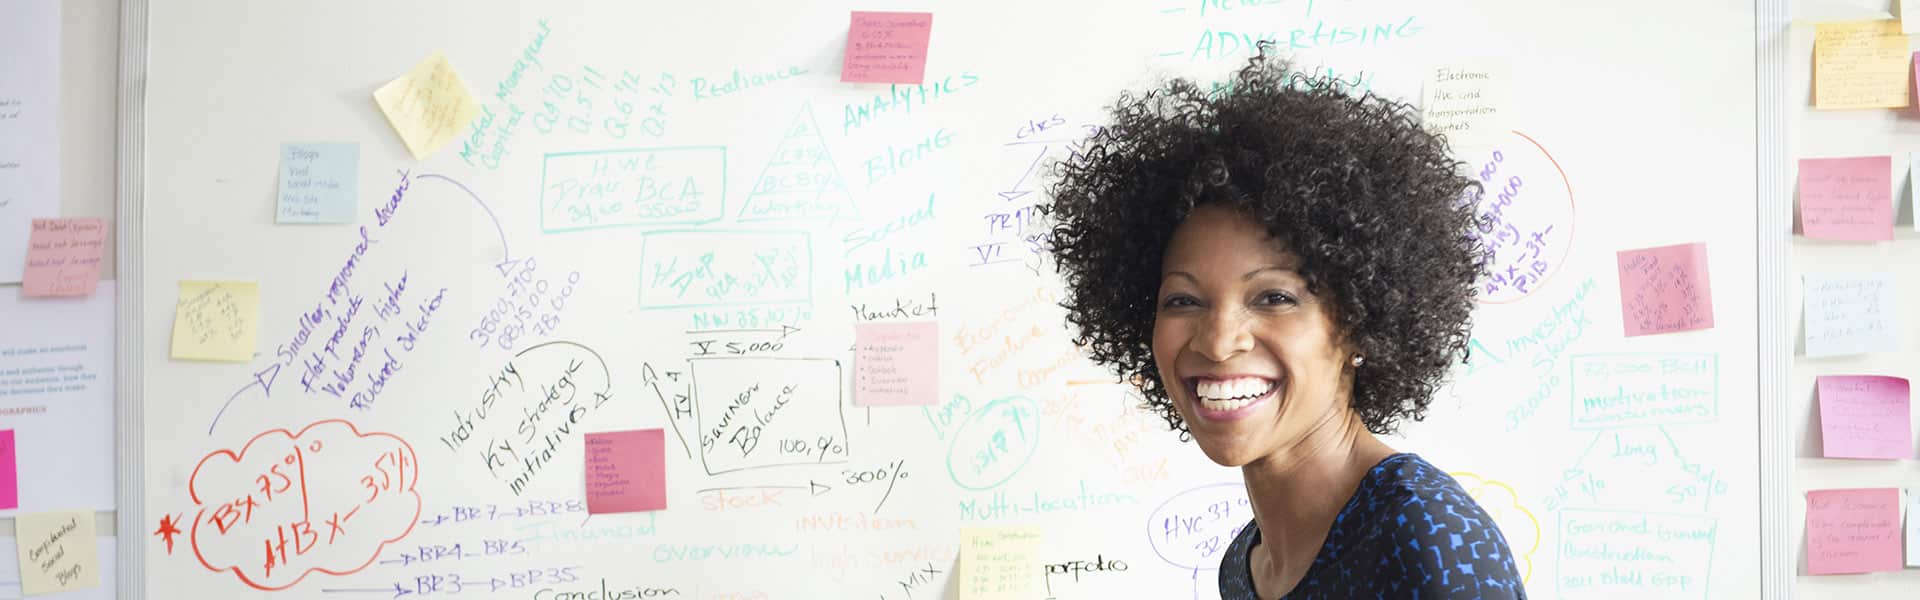 Smiling woman standing in front of whiteboard